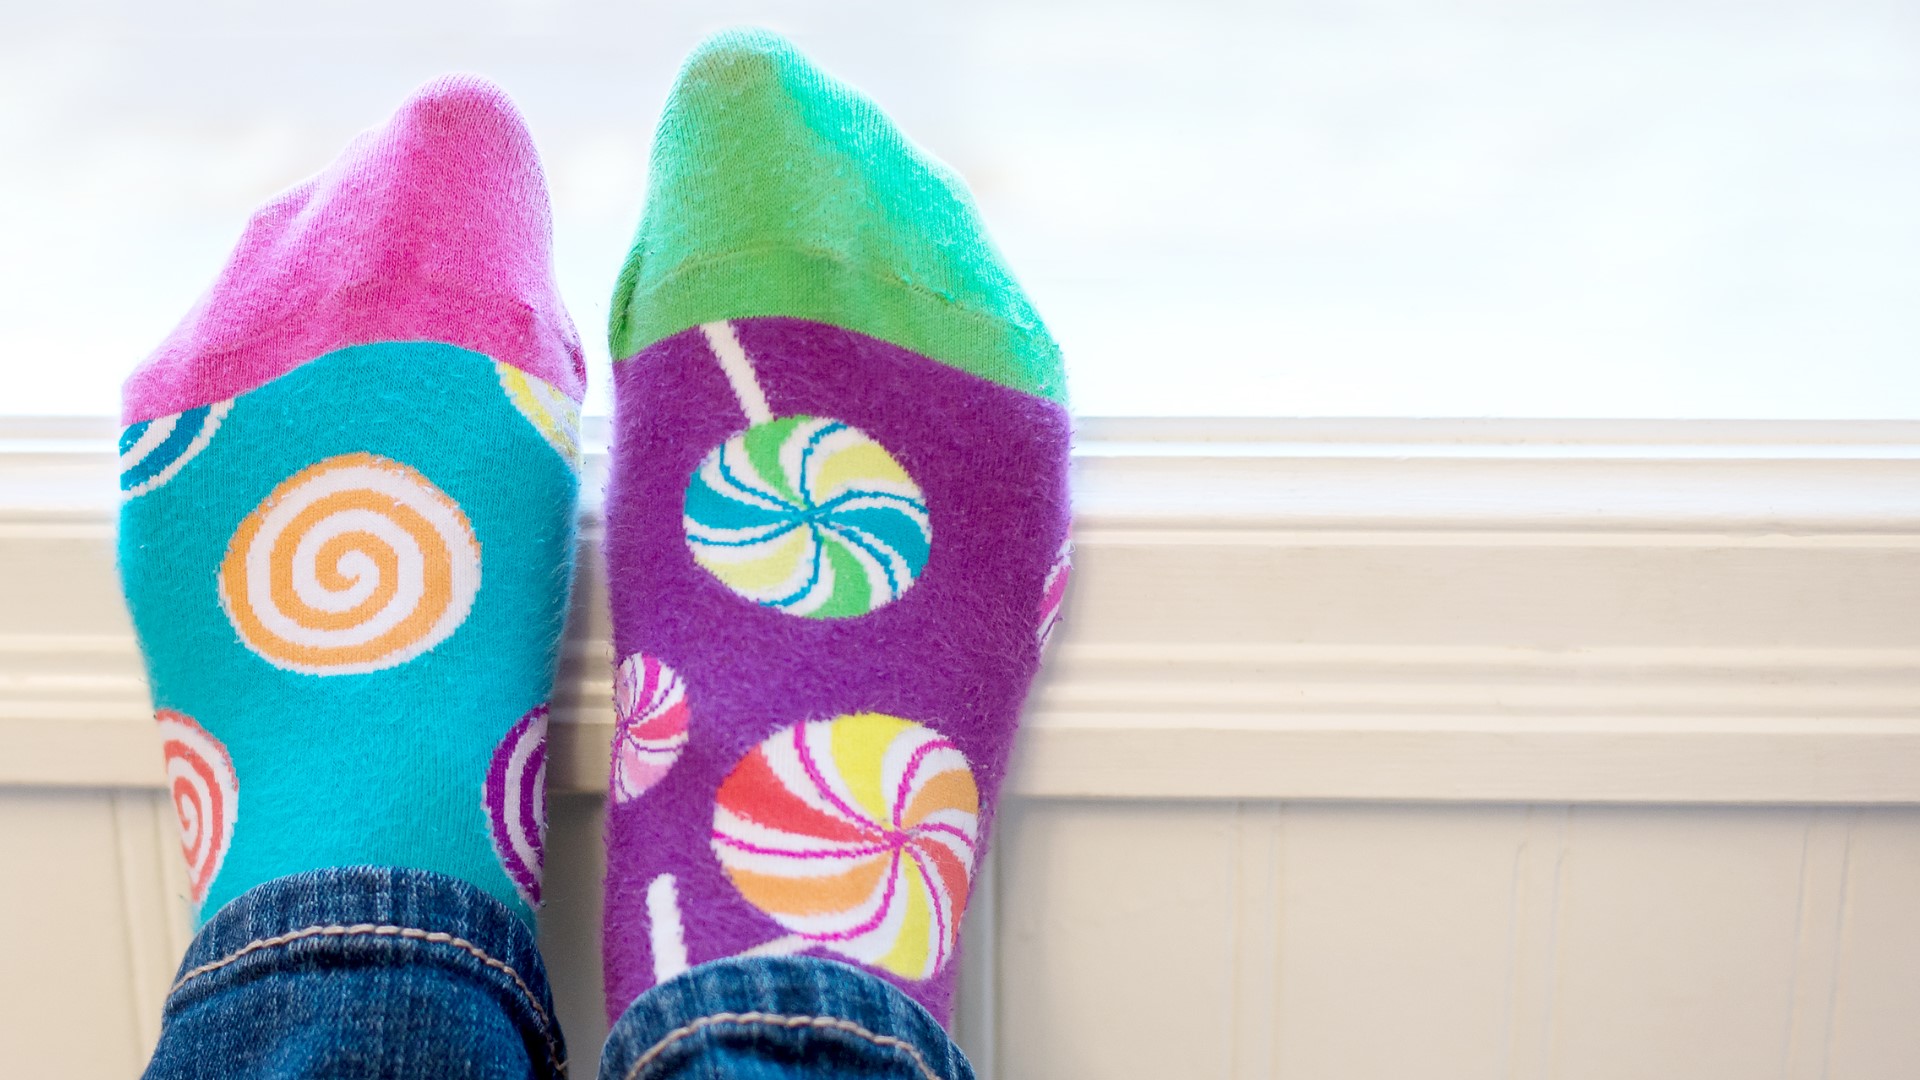 This year’s festival will attempt the largest gathering of people wearing mismatched socks.